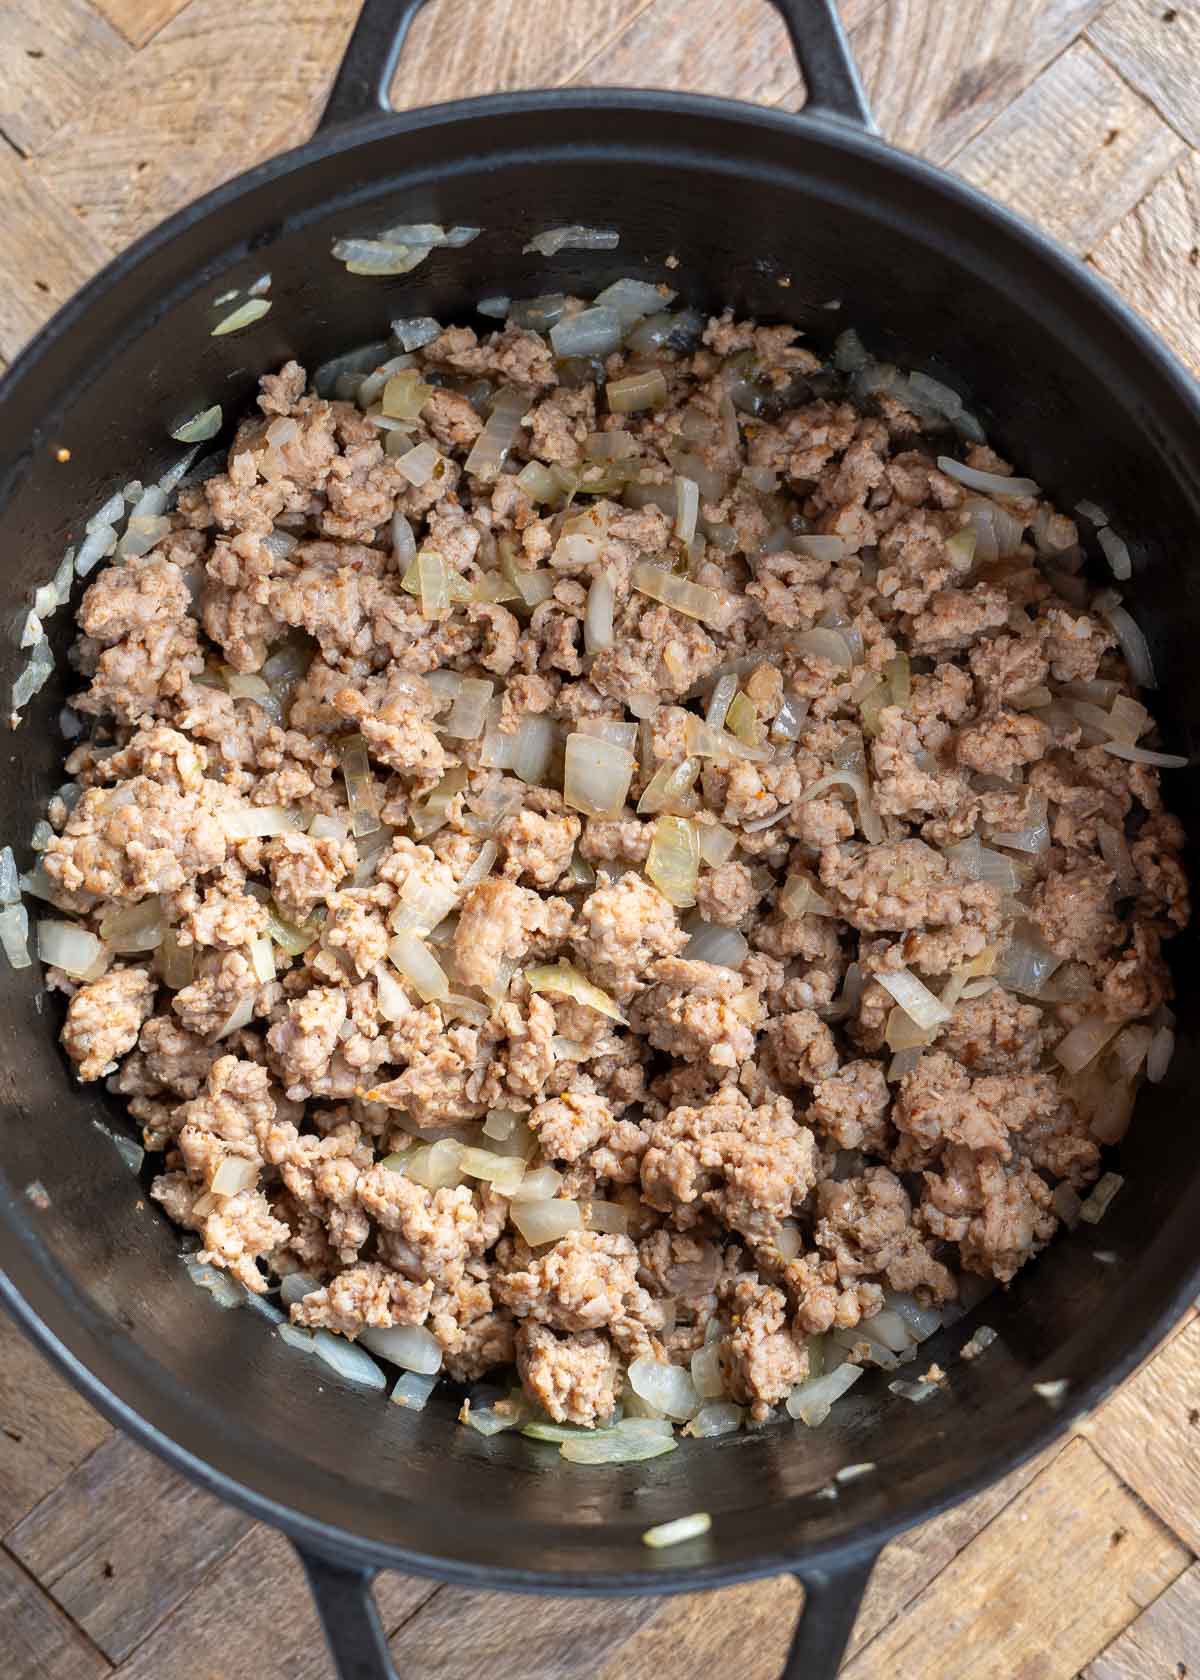 Italian sausage, onions, and garlic cooking in a pot